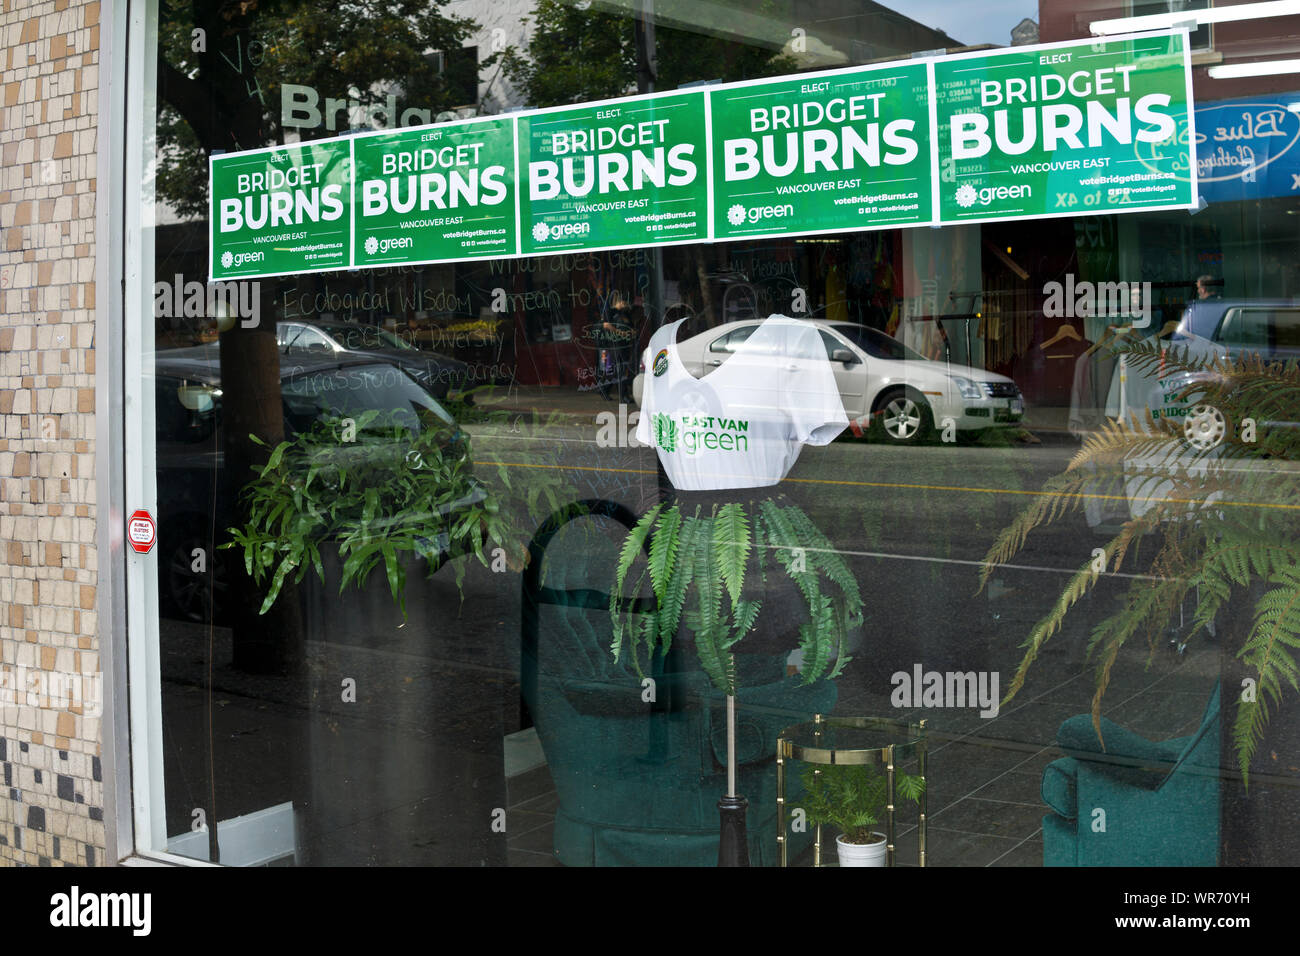 Campaign office for the federal Green Party candidate, Bridget Burns, in East Vancouver, British Columbia, Canada. Stock Photo